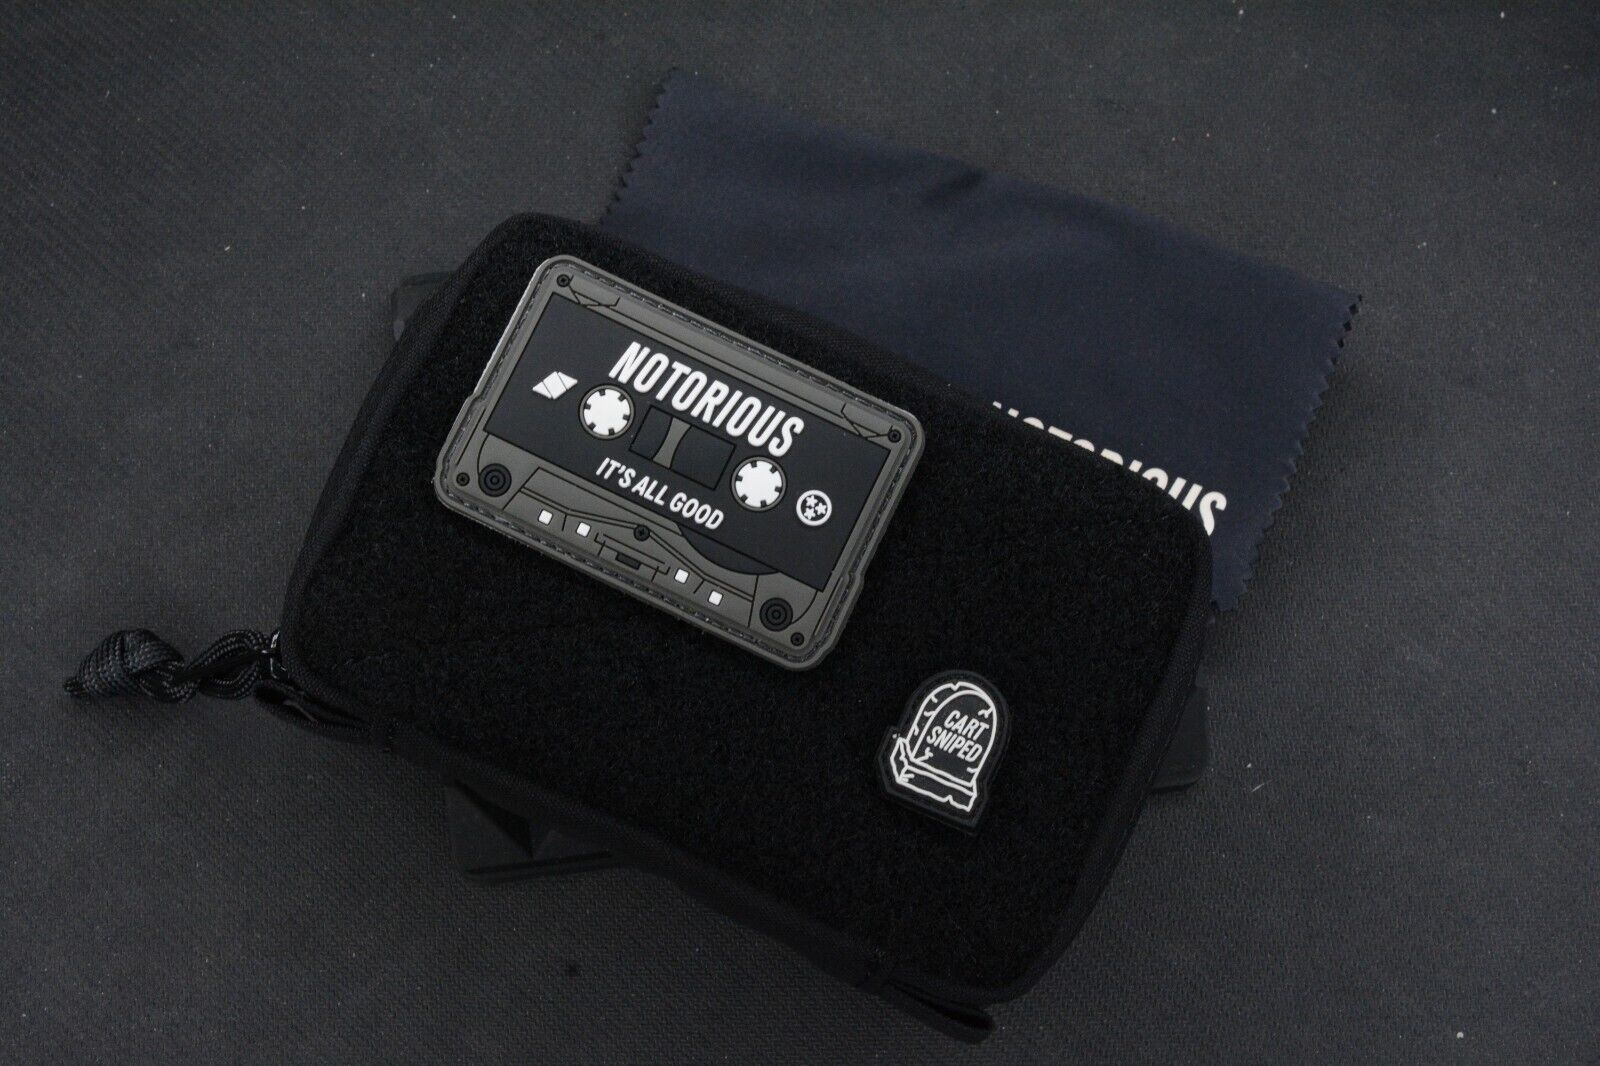 Notorious EDC “All Good” Pouch BLACKED OUT w/ EXC Mixtape & Cart Sniped Patches